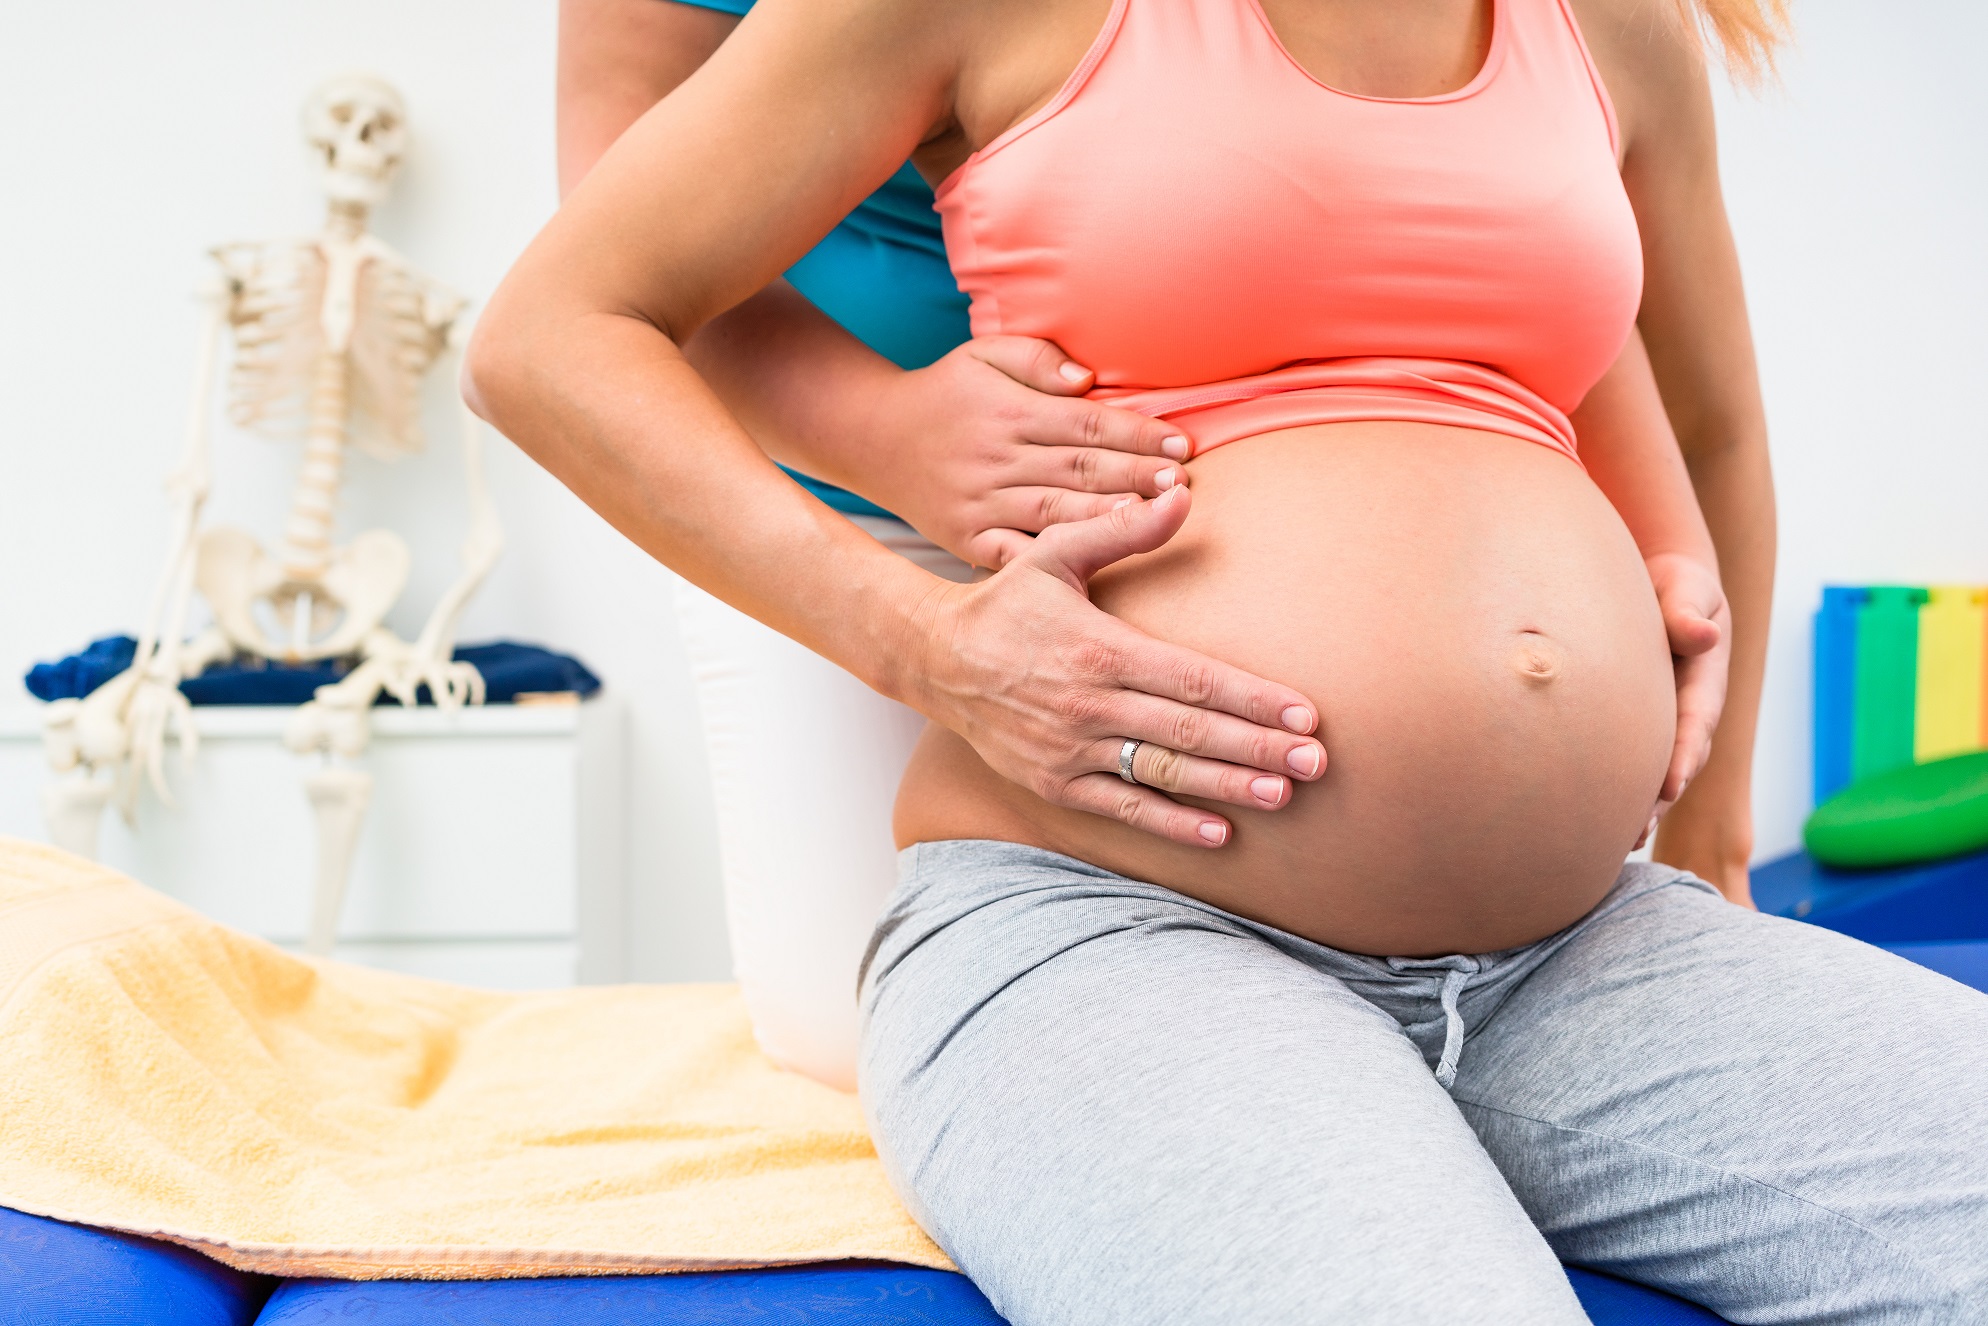 Woman receiving Pregnancy Chiropractic care from a pregnancy chiropractor